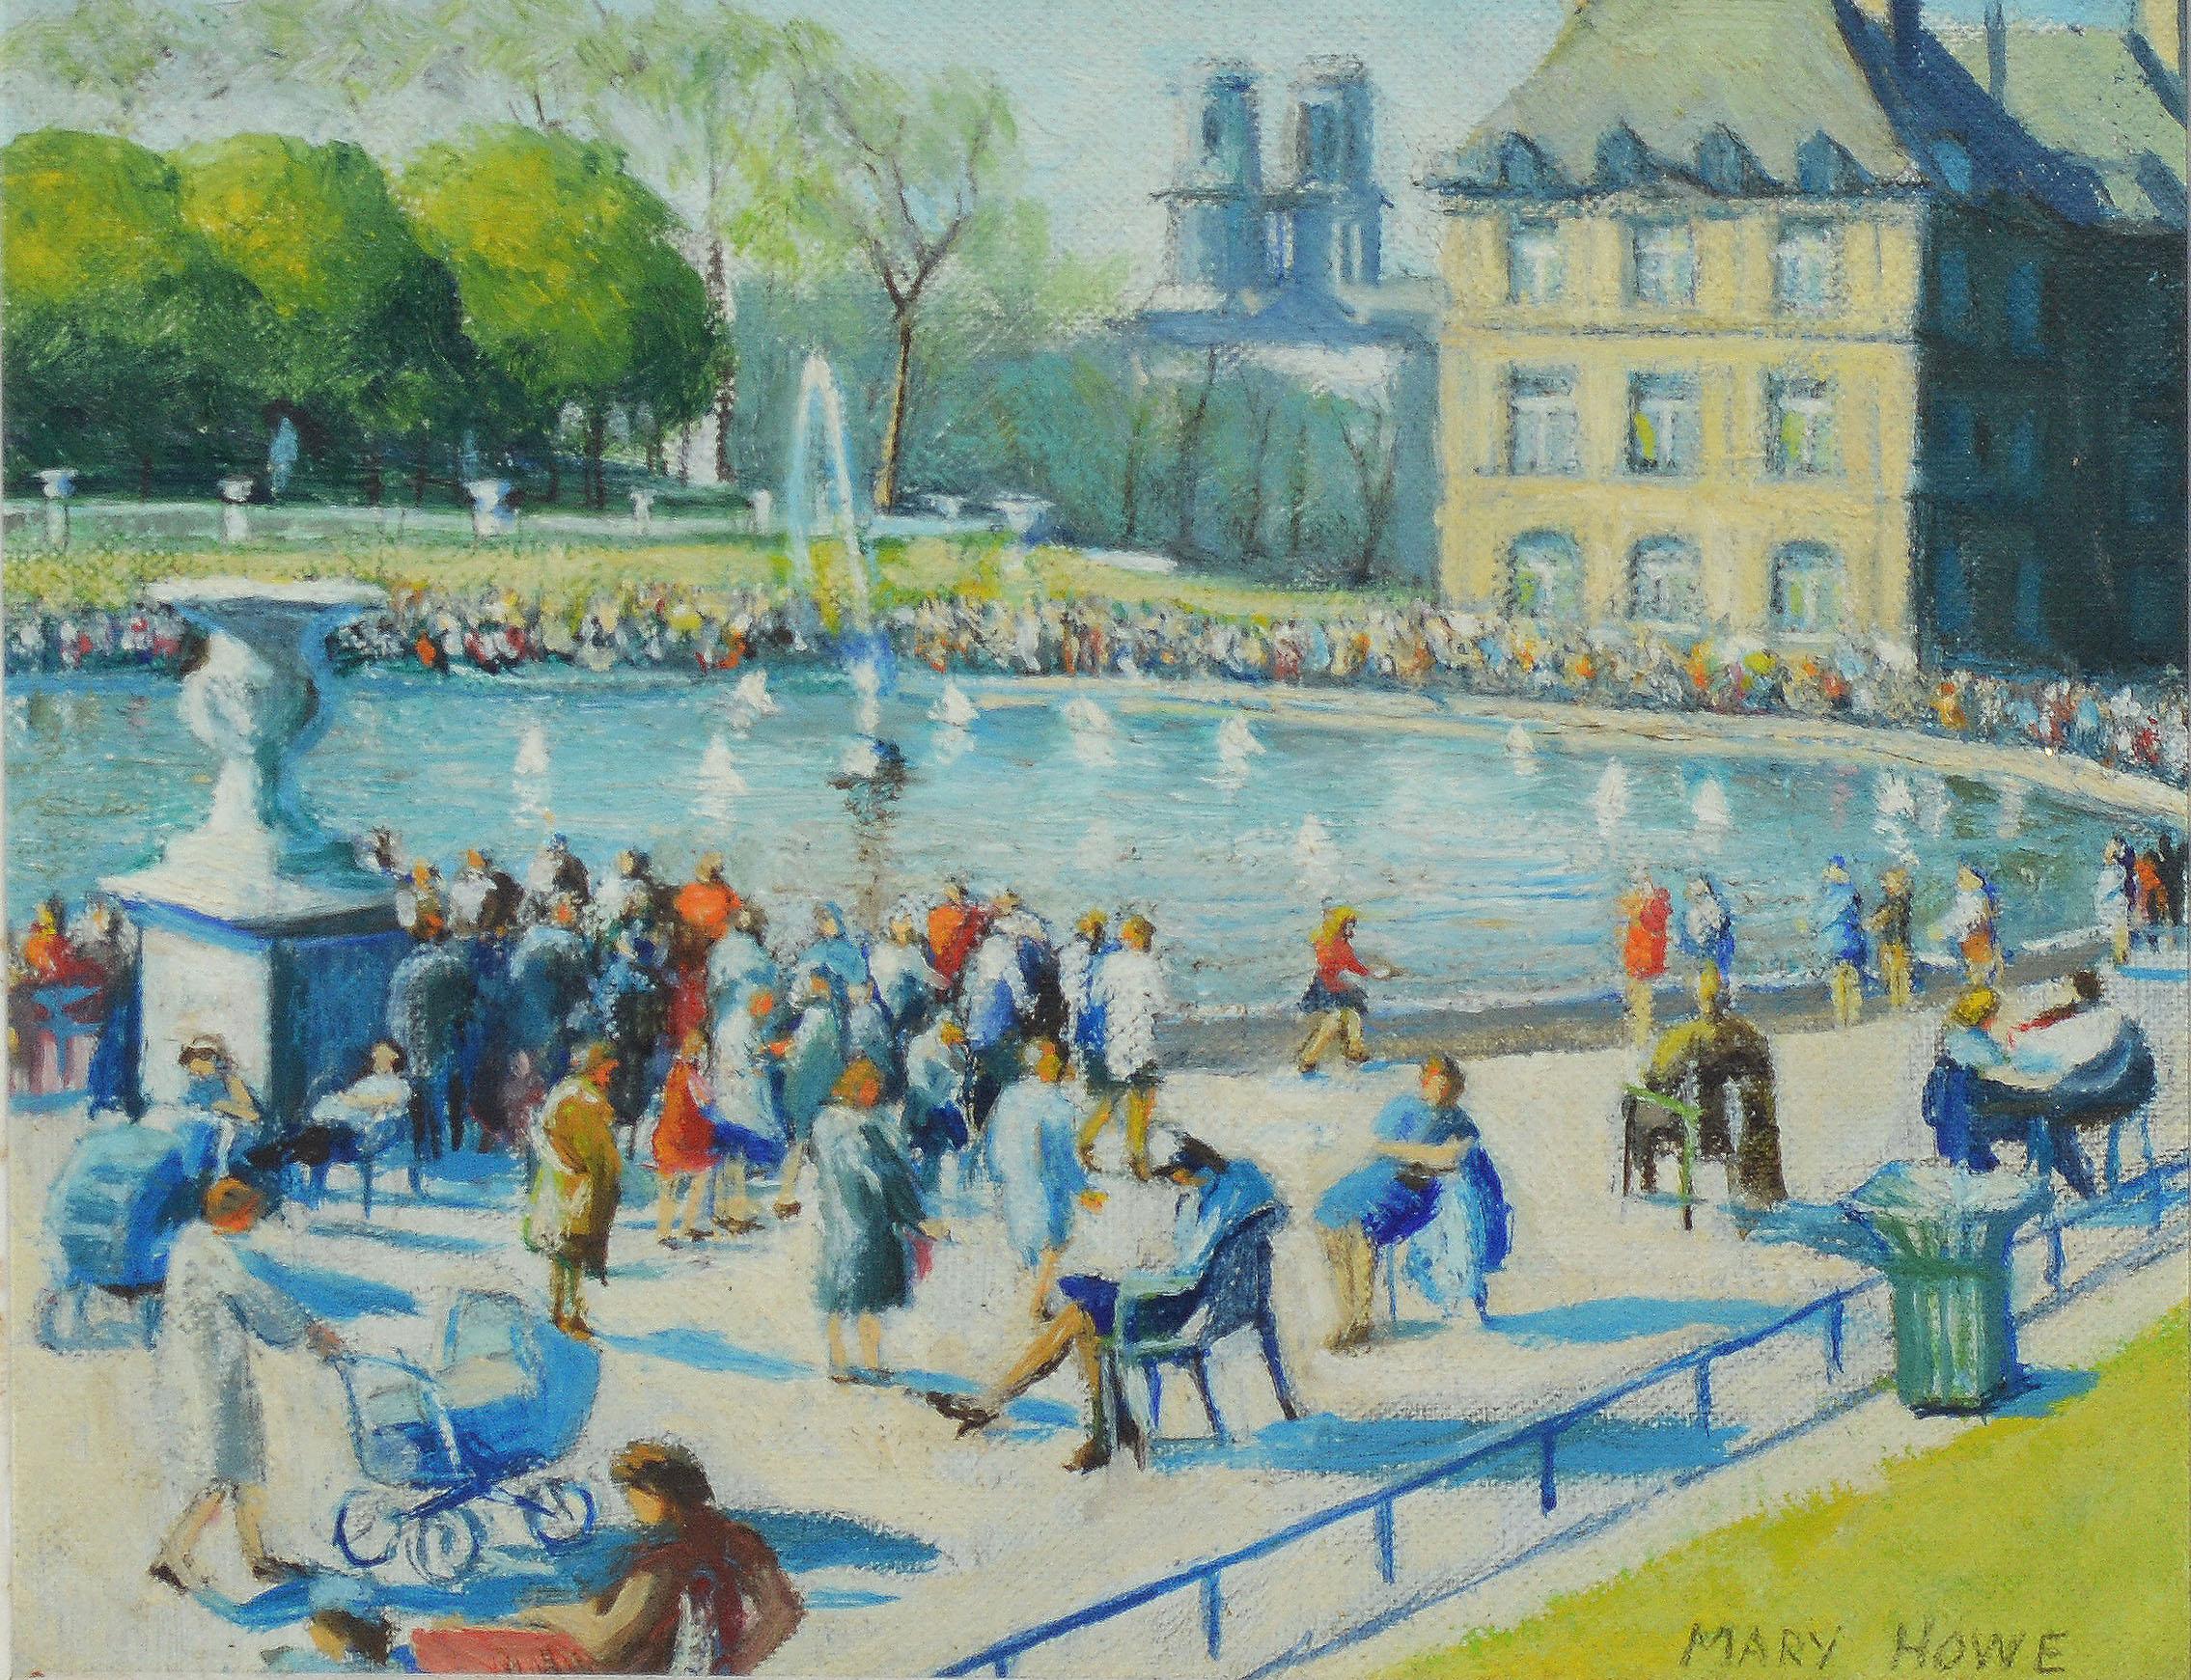 Impressionist view of a Paris park by Mary Howe.  Oil on board, circa 1930.  Signed.  Displayed in a giltwood frame.  Image, 9